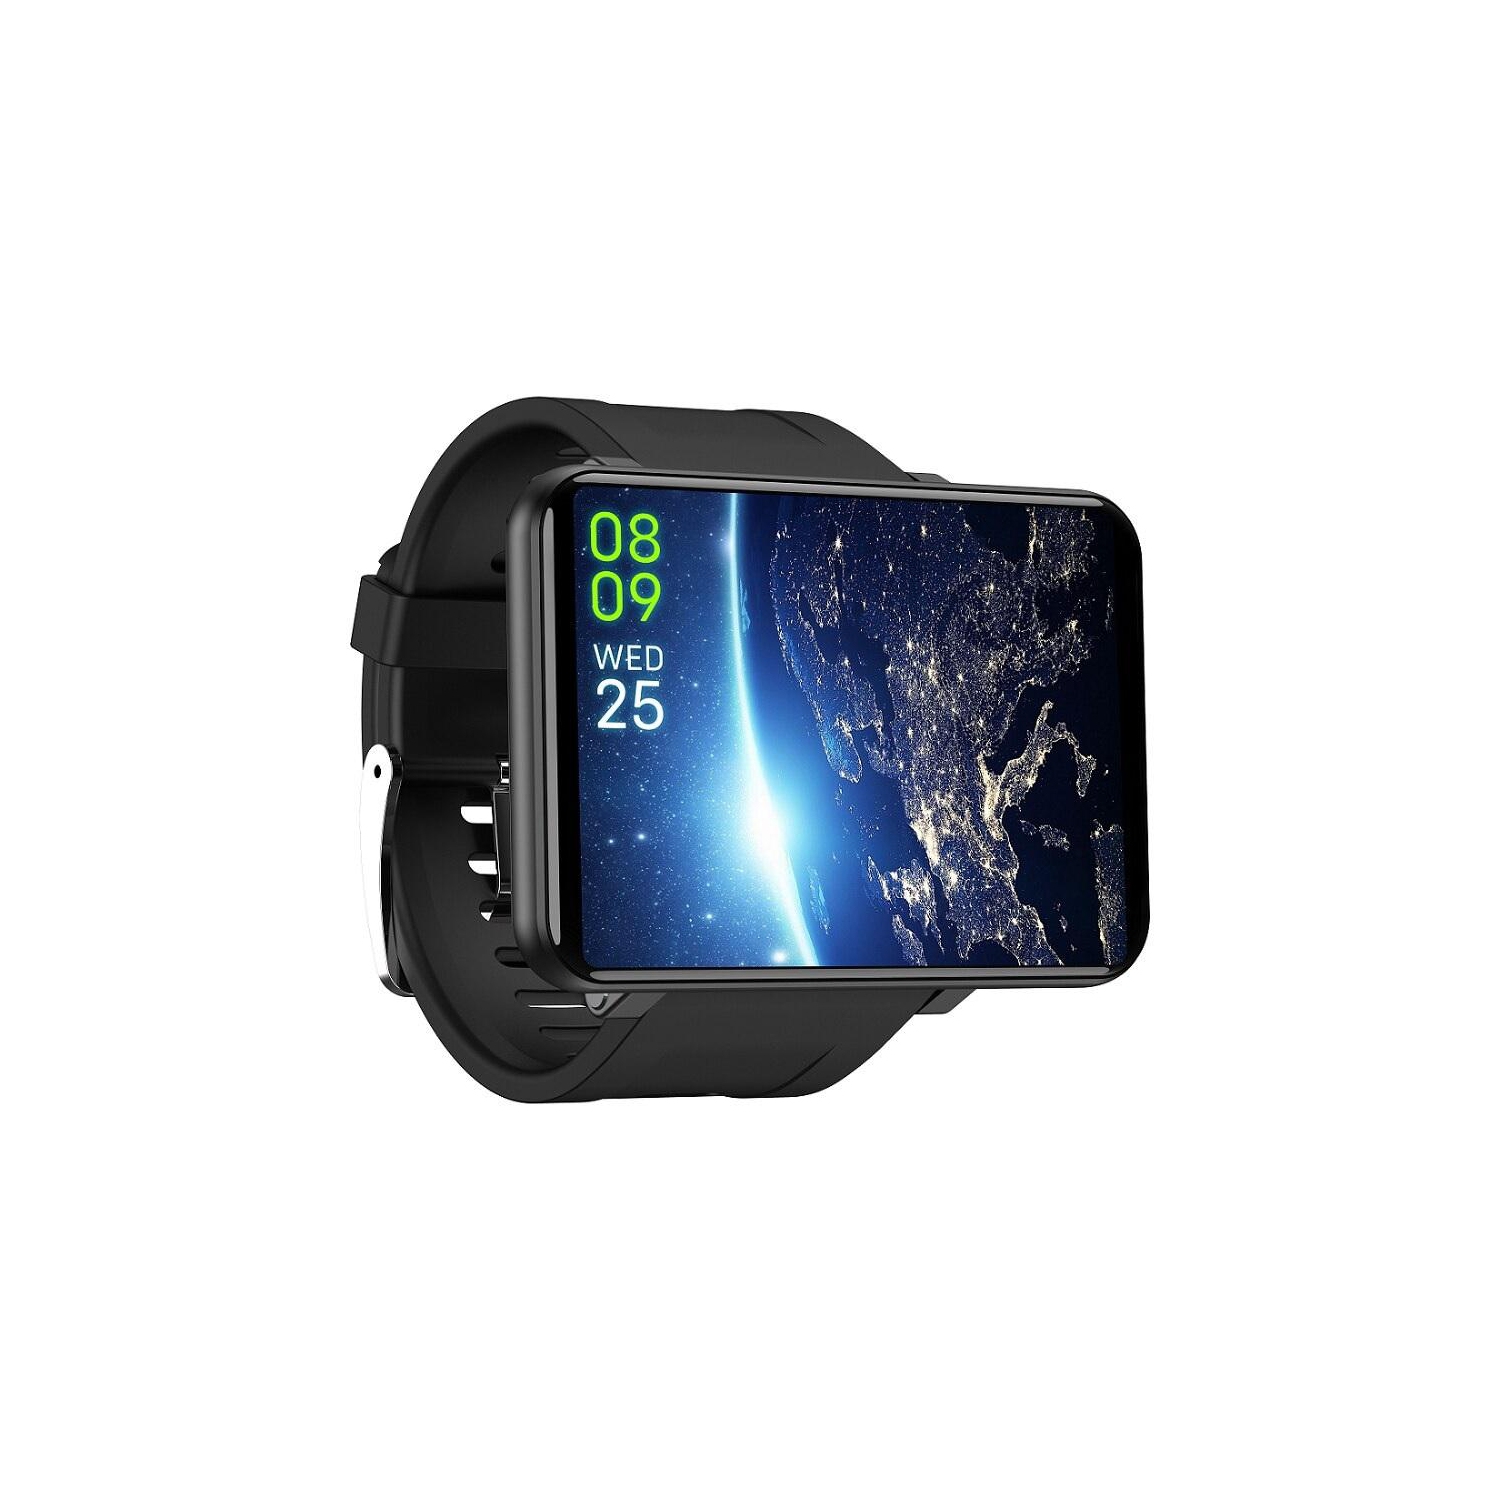 ISPEKTRUM iS100 4G Smartwatch 2.8” Screen 4G LTE Call, WiFi, 5MP Camera, Long Battery Life, GPS, Google Maps & Play Store, 1GB+16GB, HR Monitor Multiple Sports Mode Waterproof